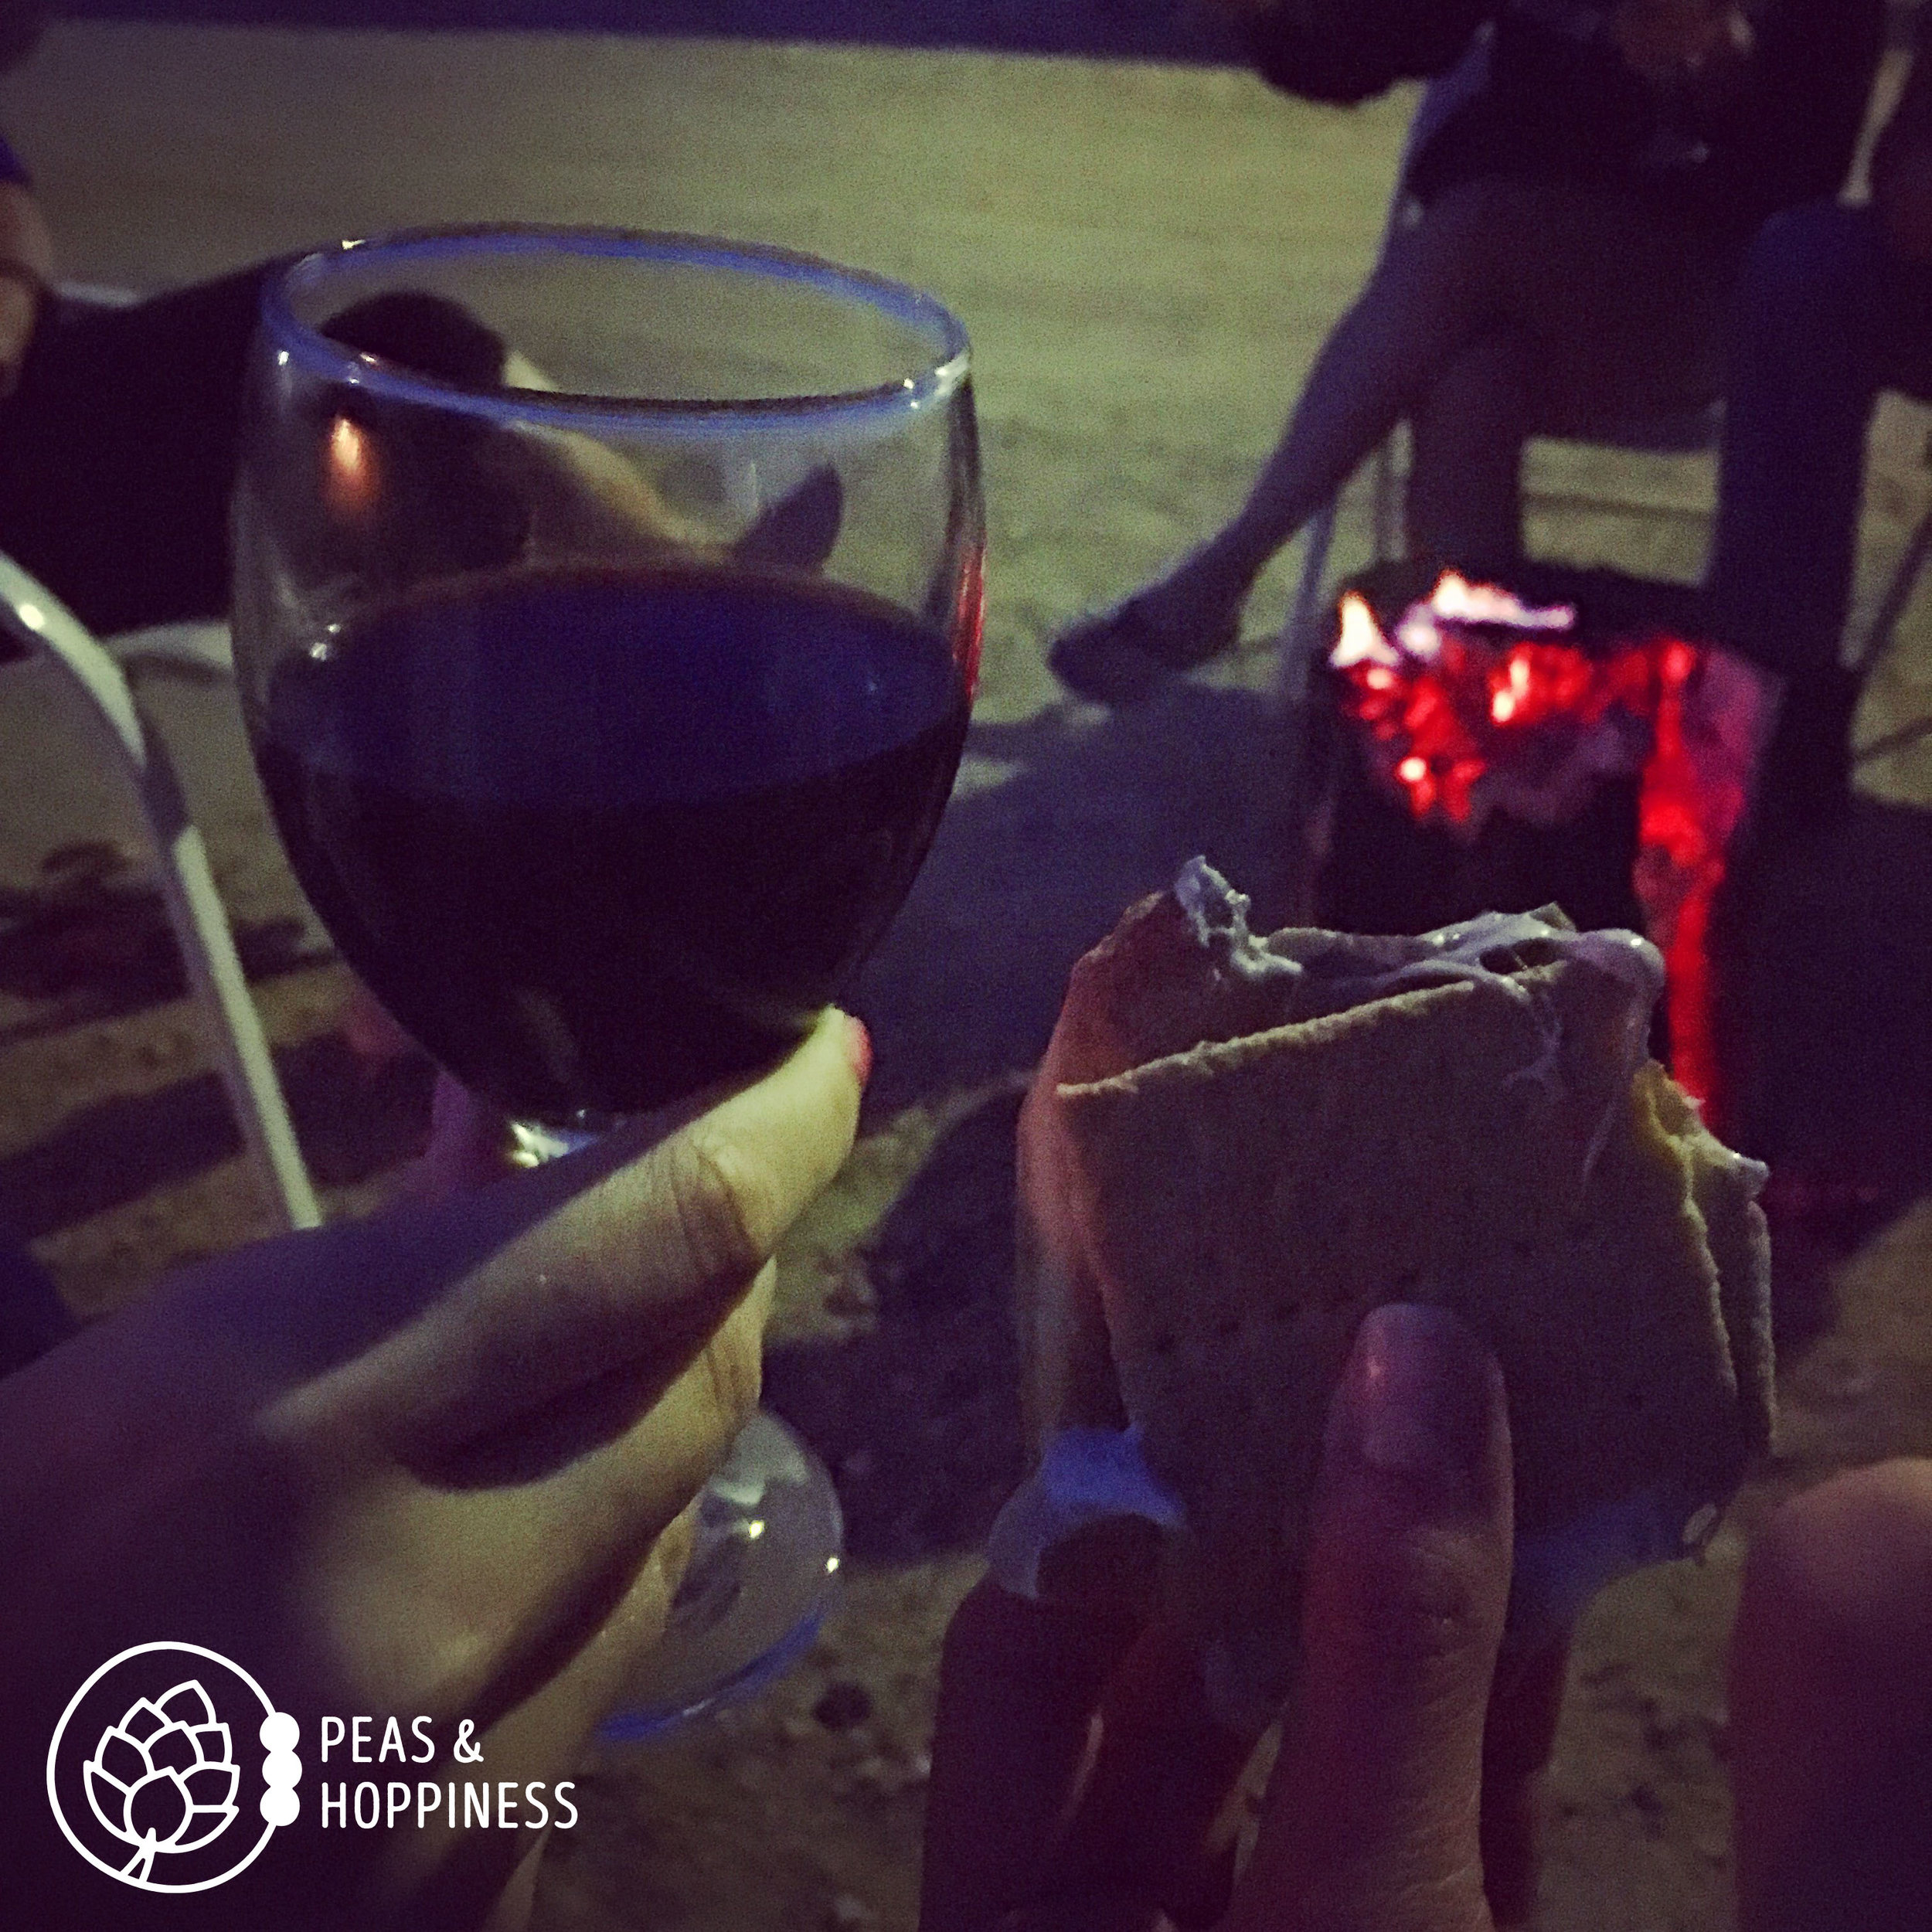 Wine + S'mores + Campfire + Friends. Sweet, sweet summertime